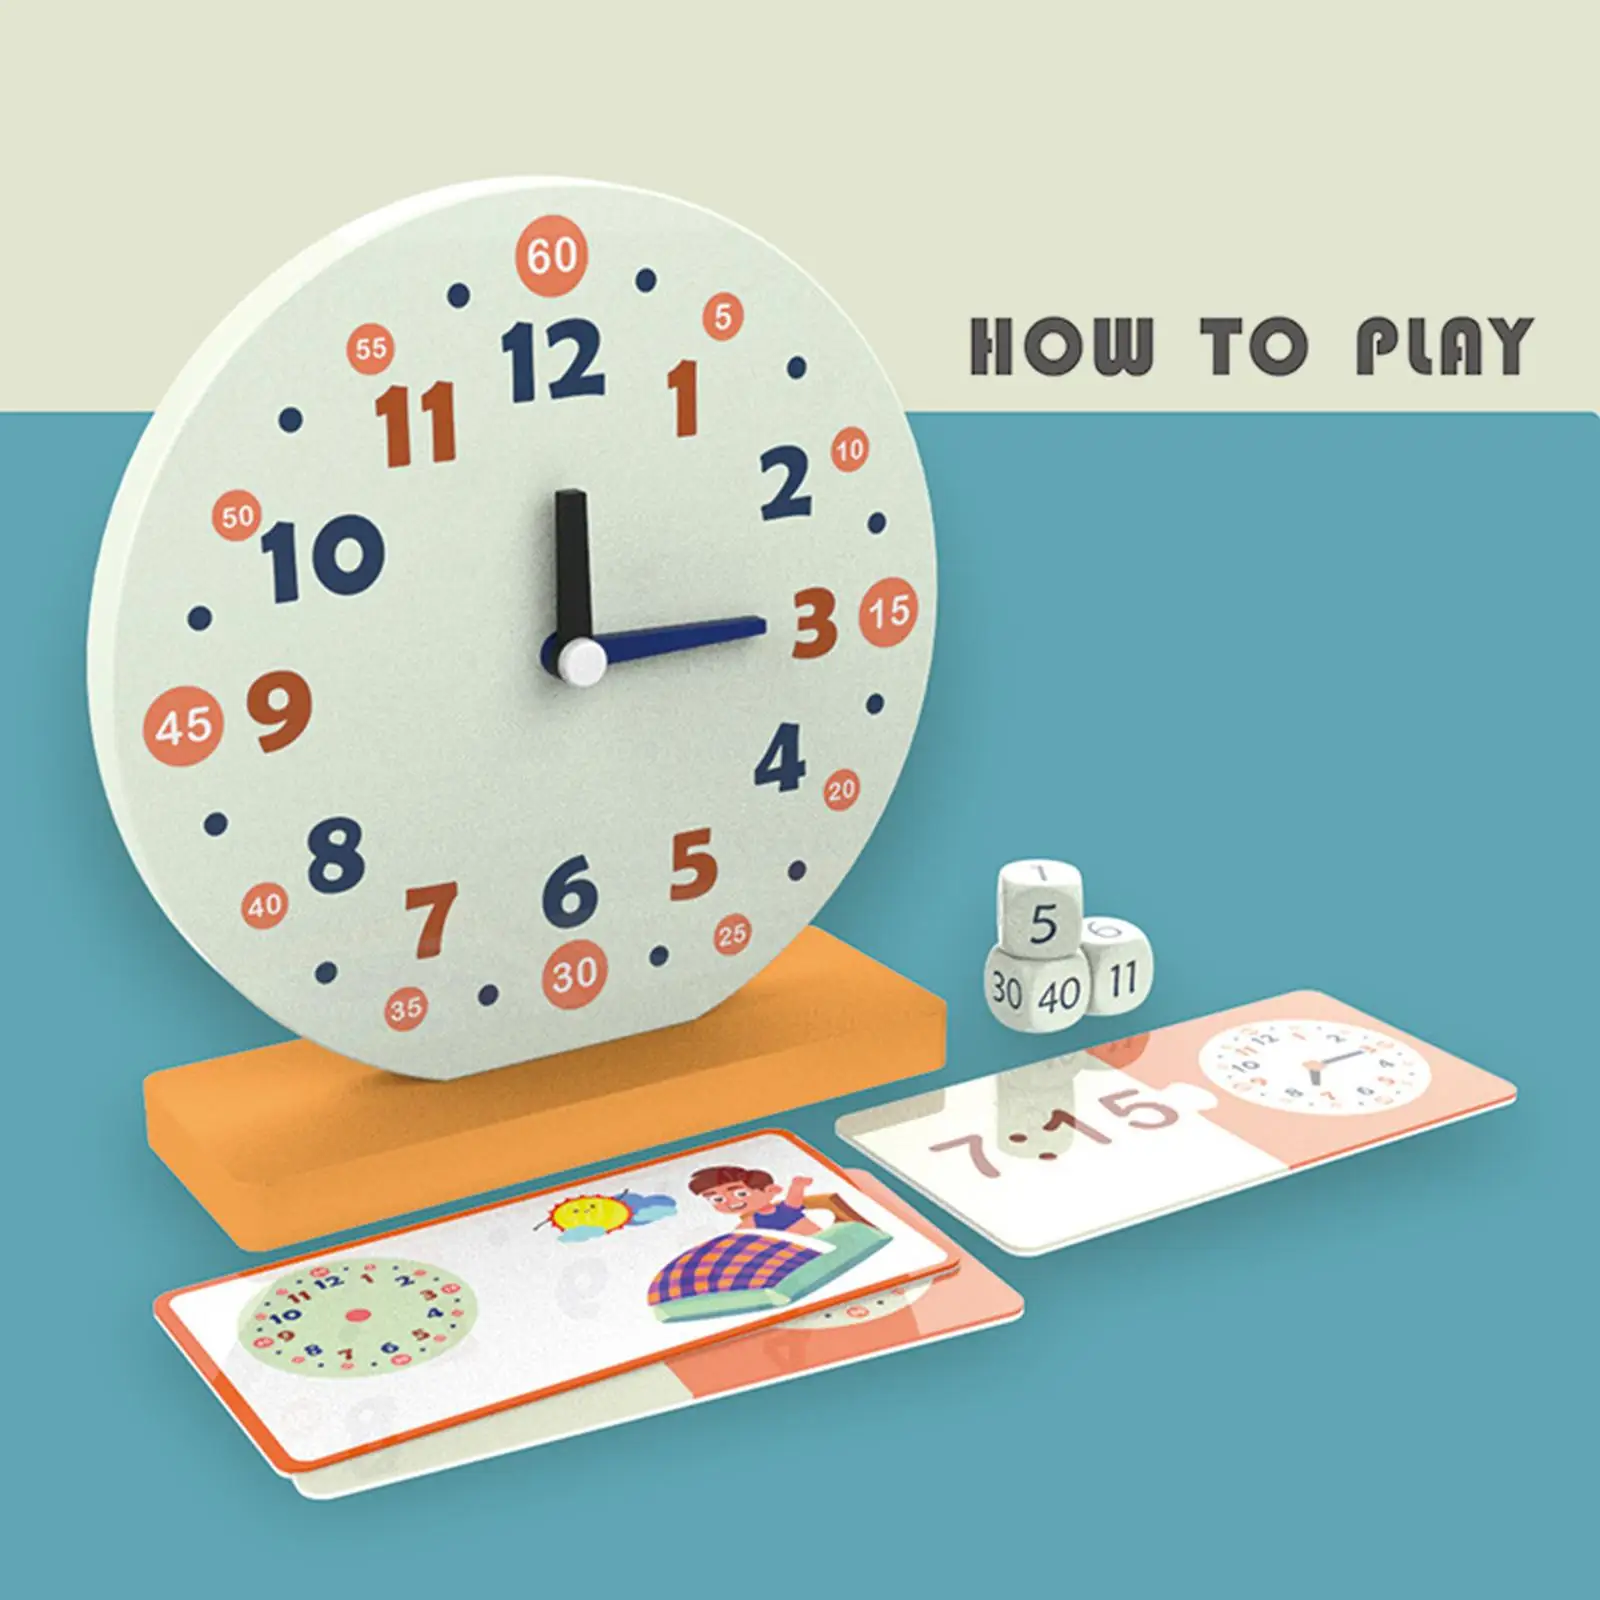 Montessori Wooden Clock Toys Kindergartner Learning Activities Learn How to Tell Time Teaching Clock for Classroom Baby Toddler